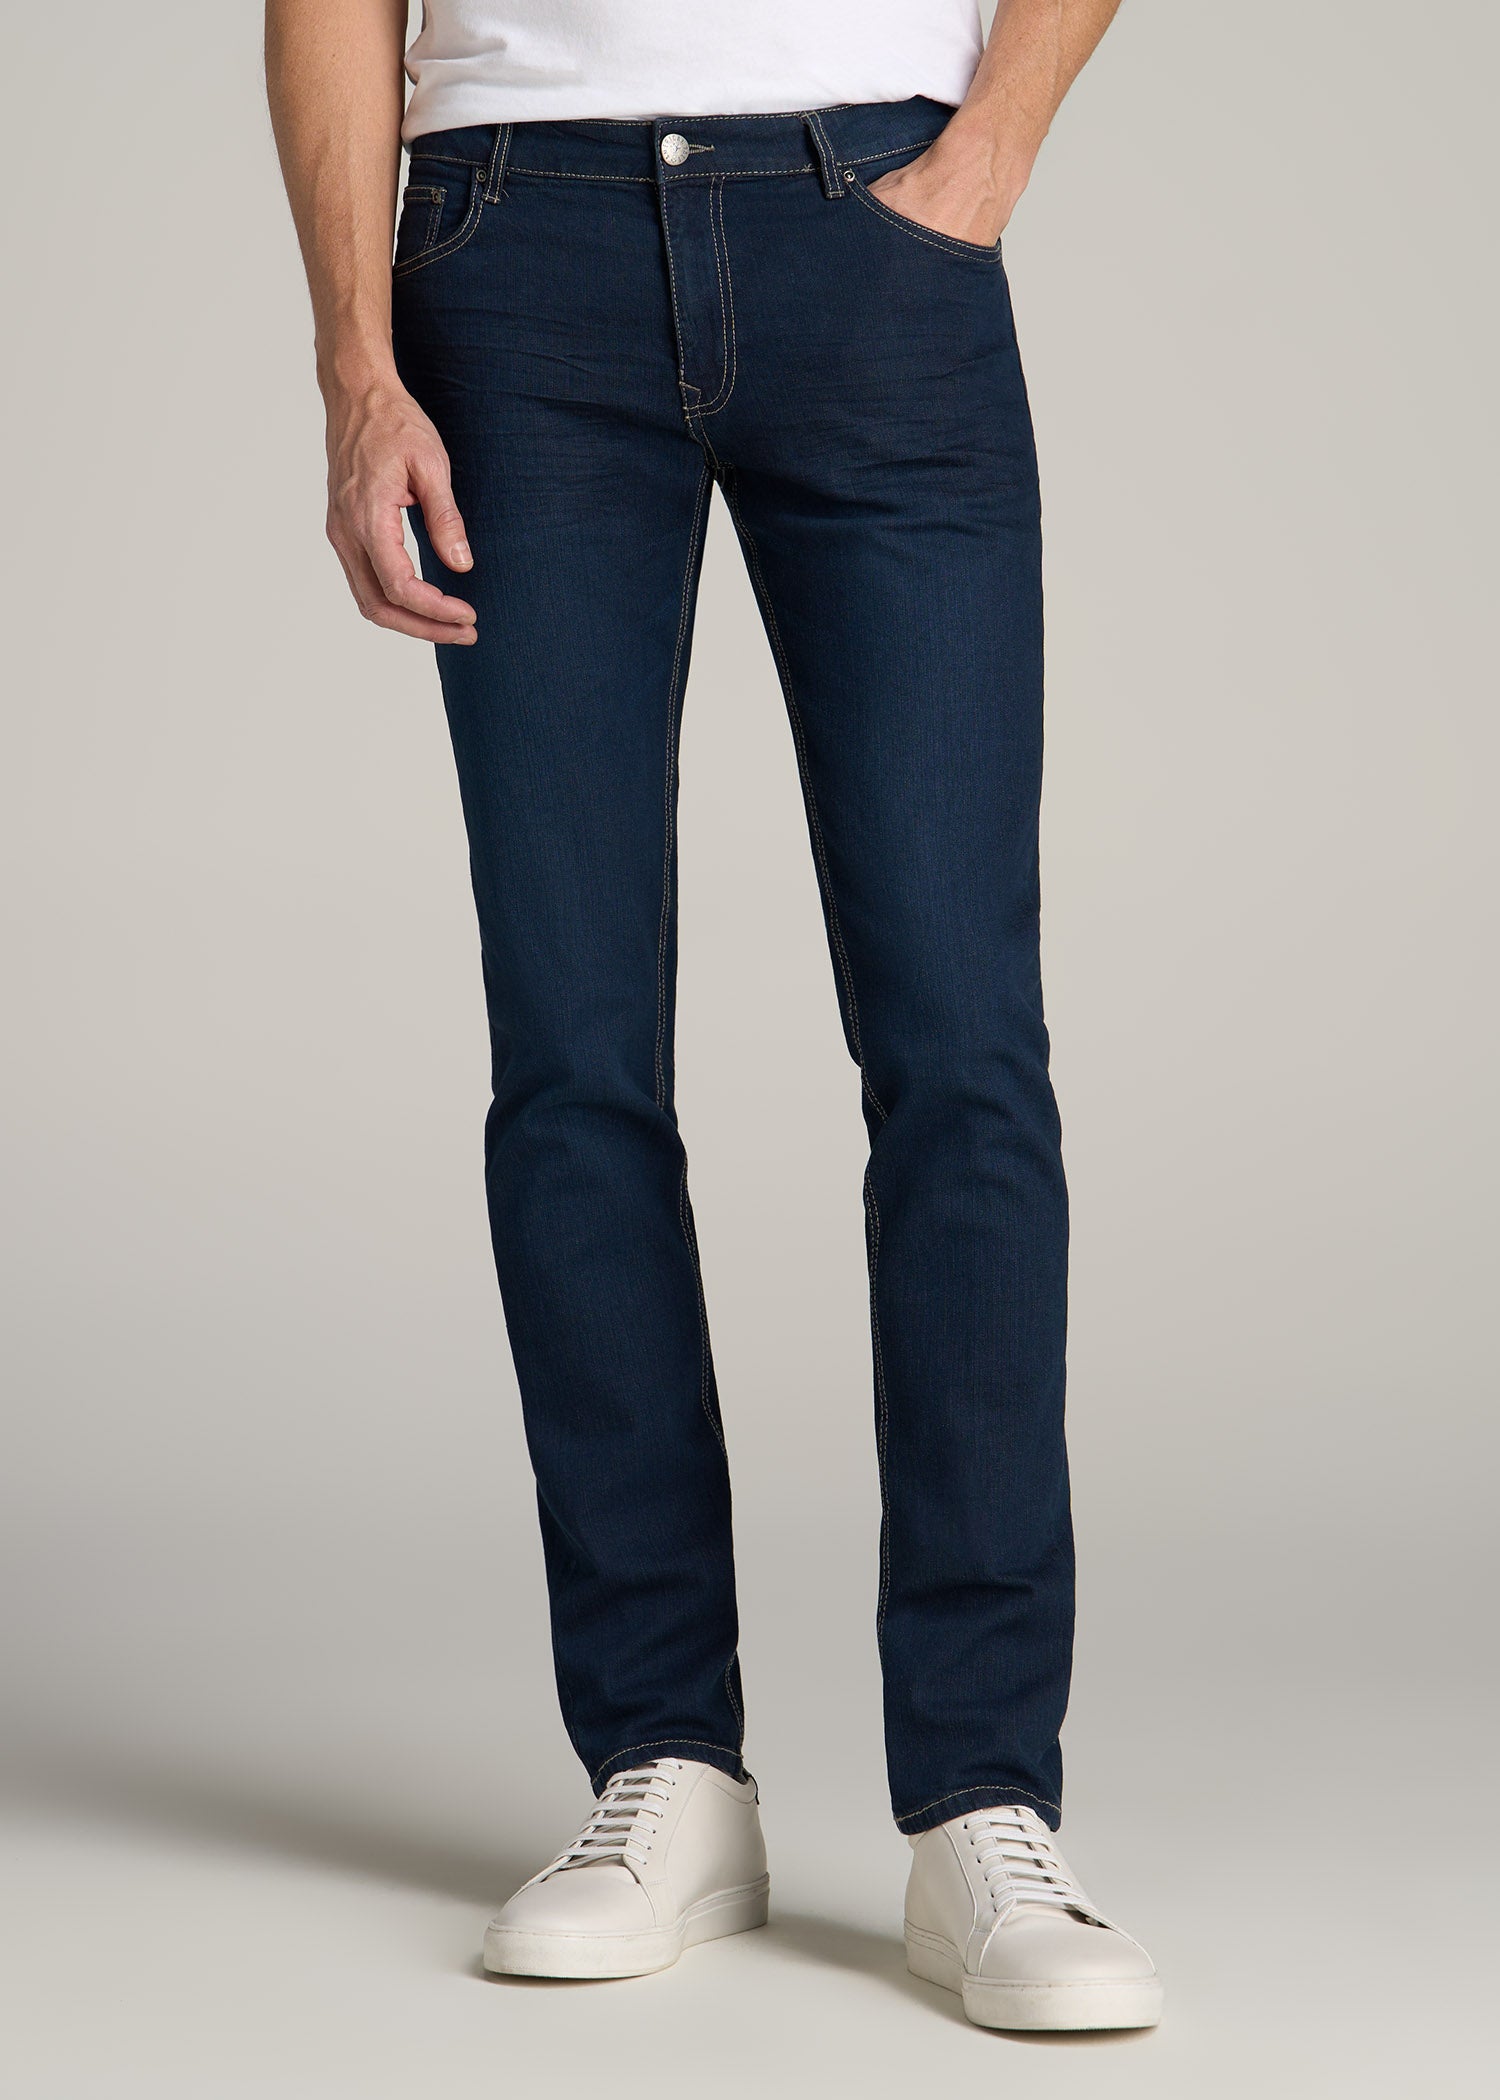 Tall Men For Jeans Tall | Carman Tapered American Blue-Steel